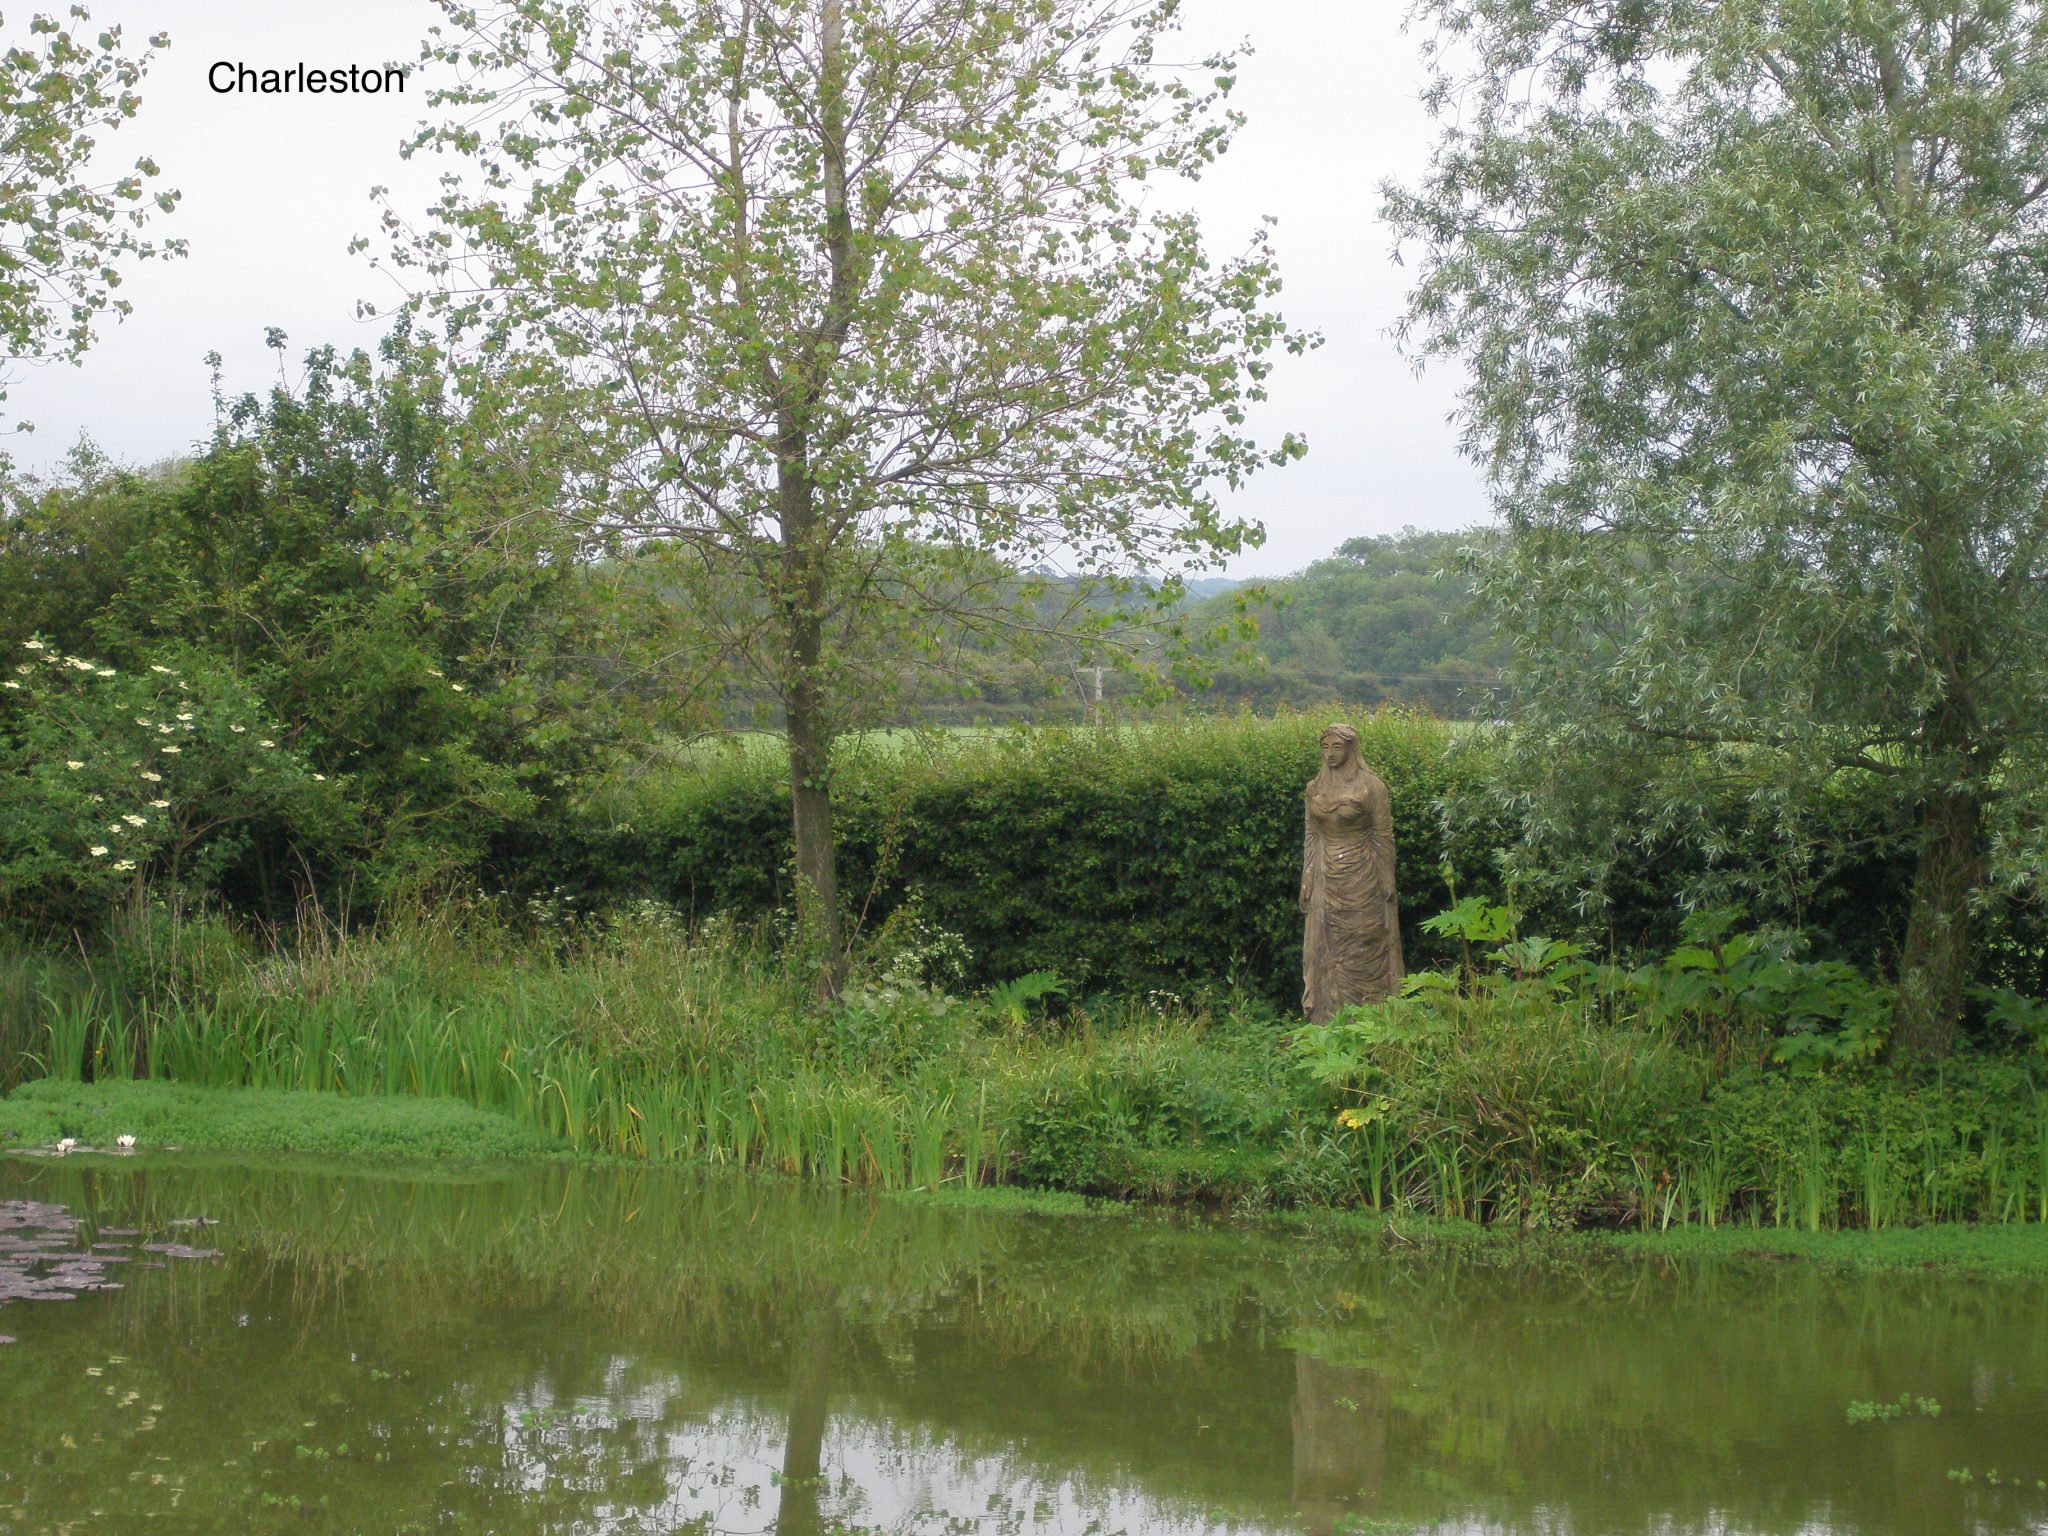 Quentin Bell's tall FEMALE FIGURE, on the far side of the pond, was made in 1954.